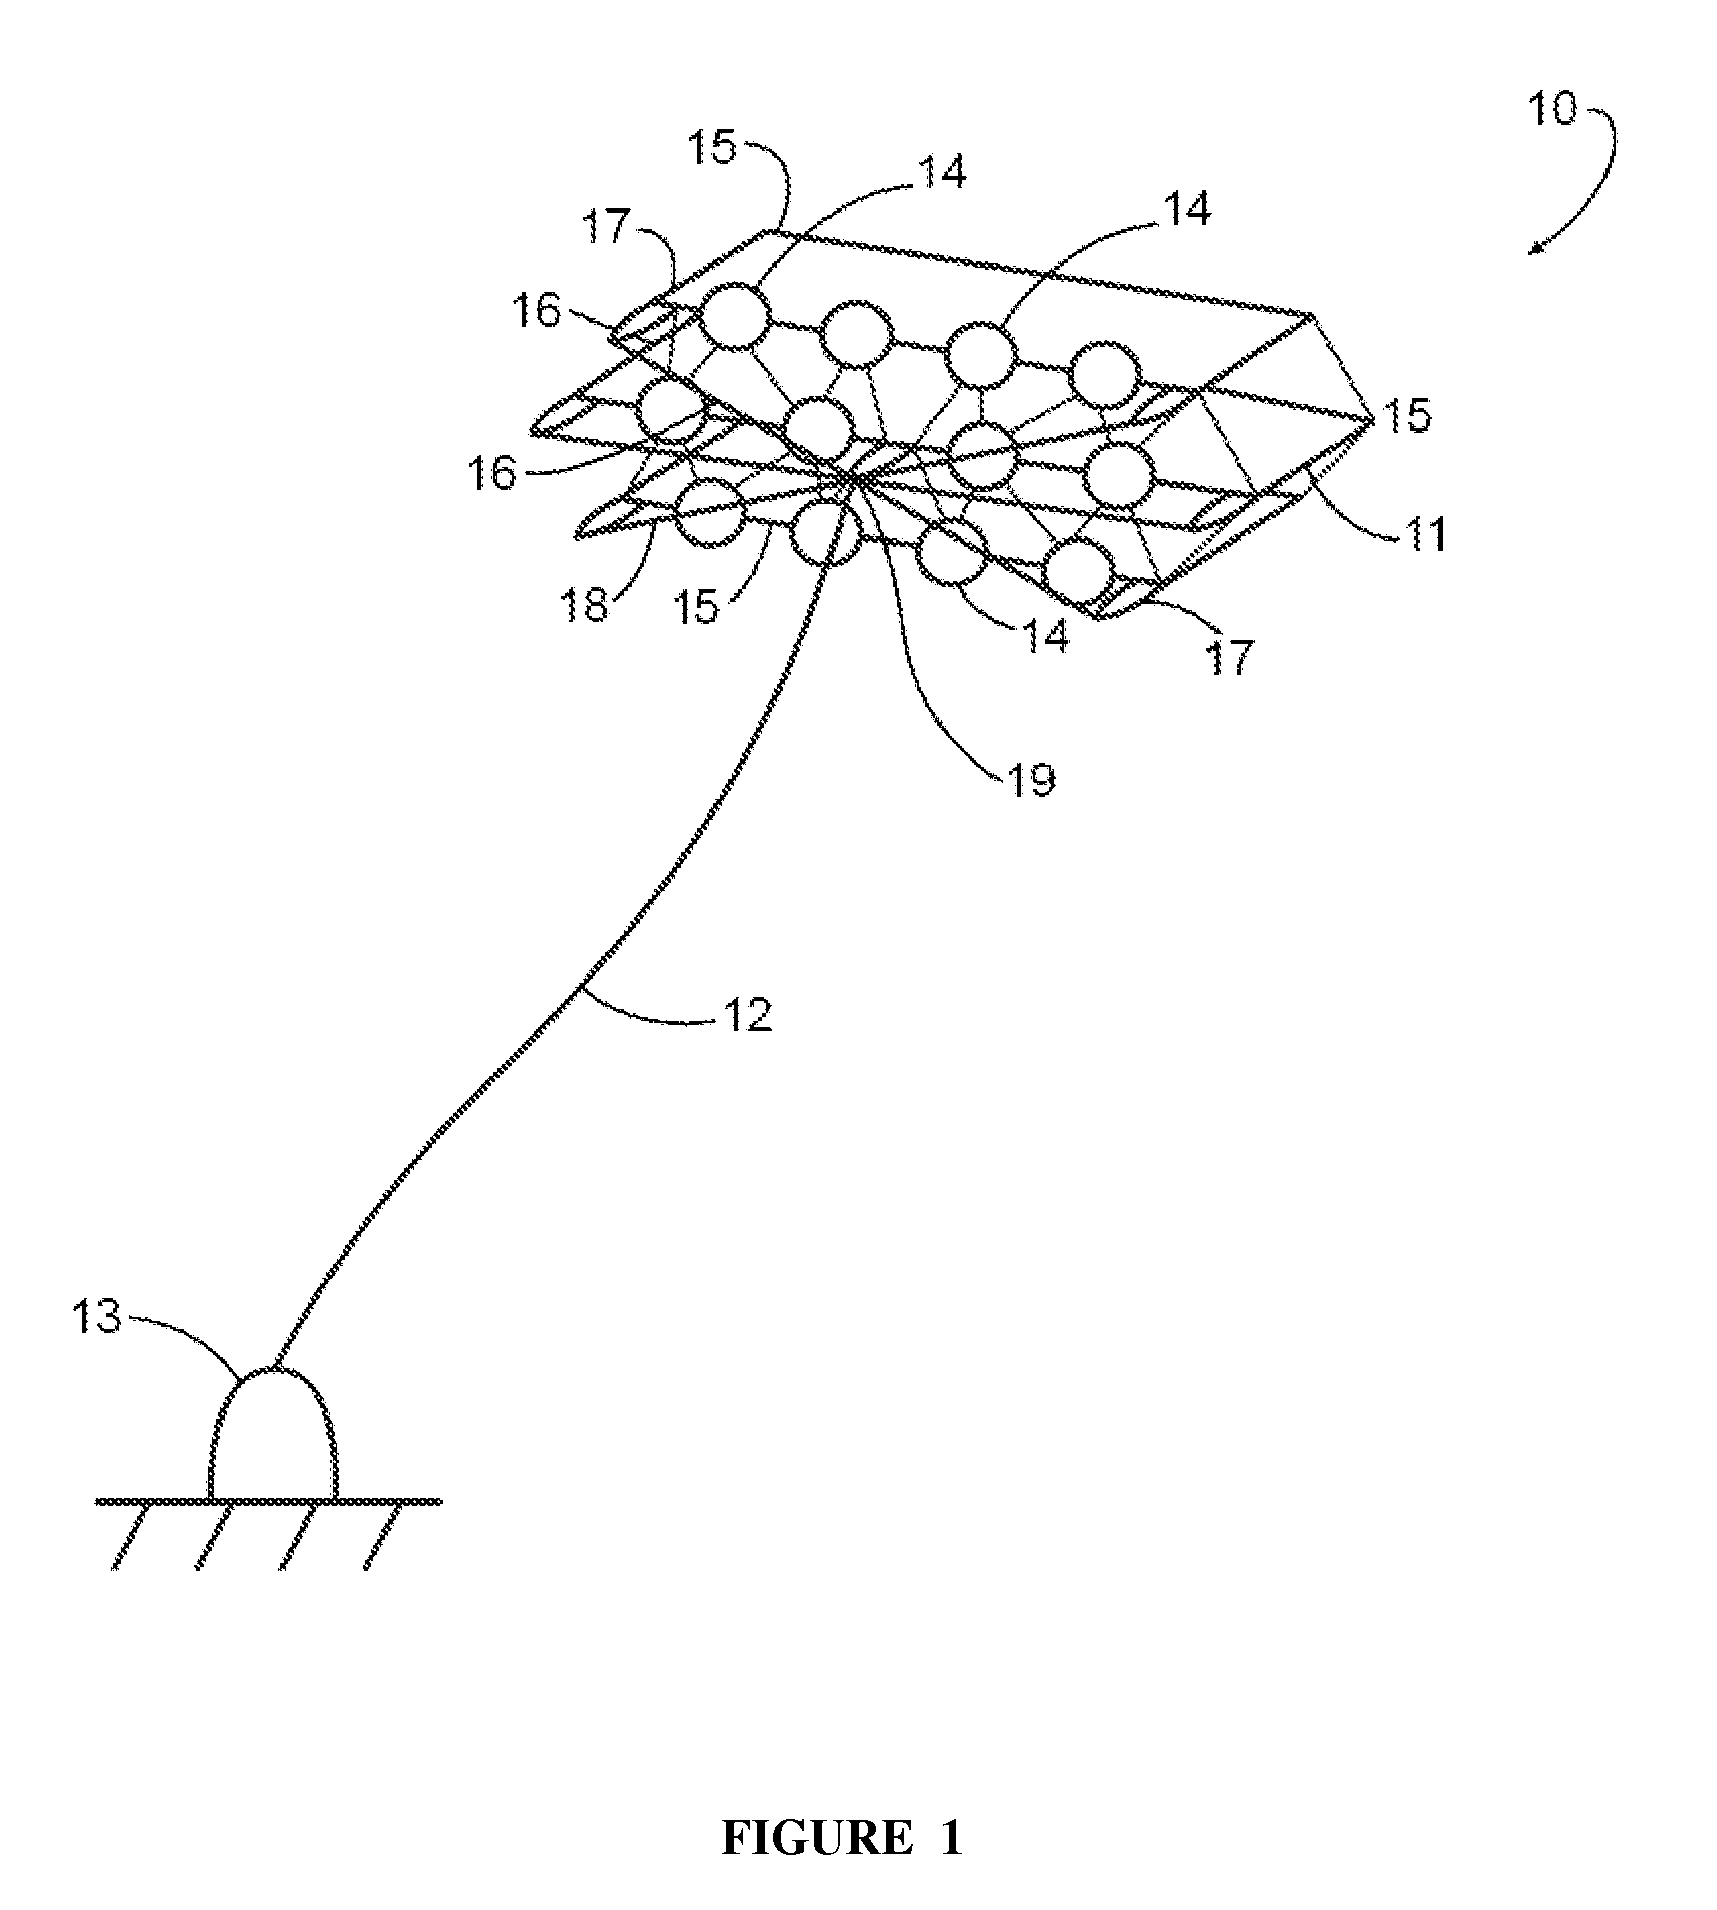 Tethered Airborne Power Generation System With Vertical Take-Off and Landing Capability